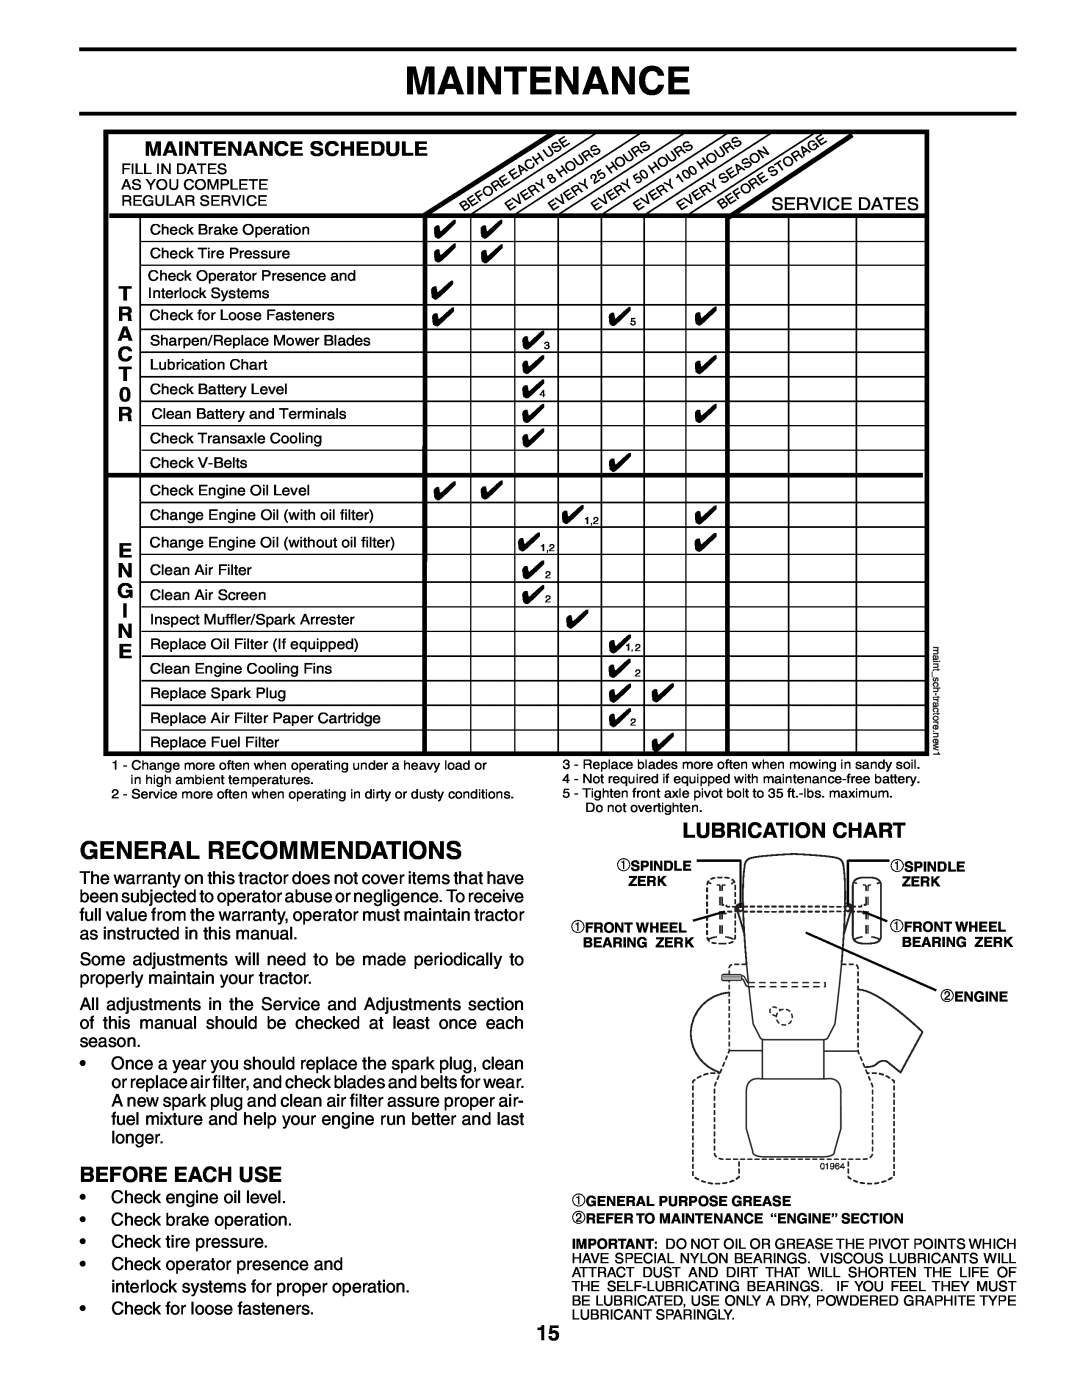 Weed Eater WET17H42STA manual General Recommendations, Lubrication Chart, Before Each Use, Maintenance Schedule 